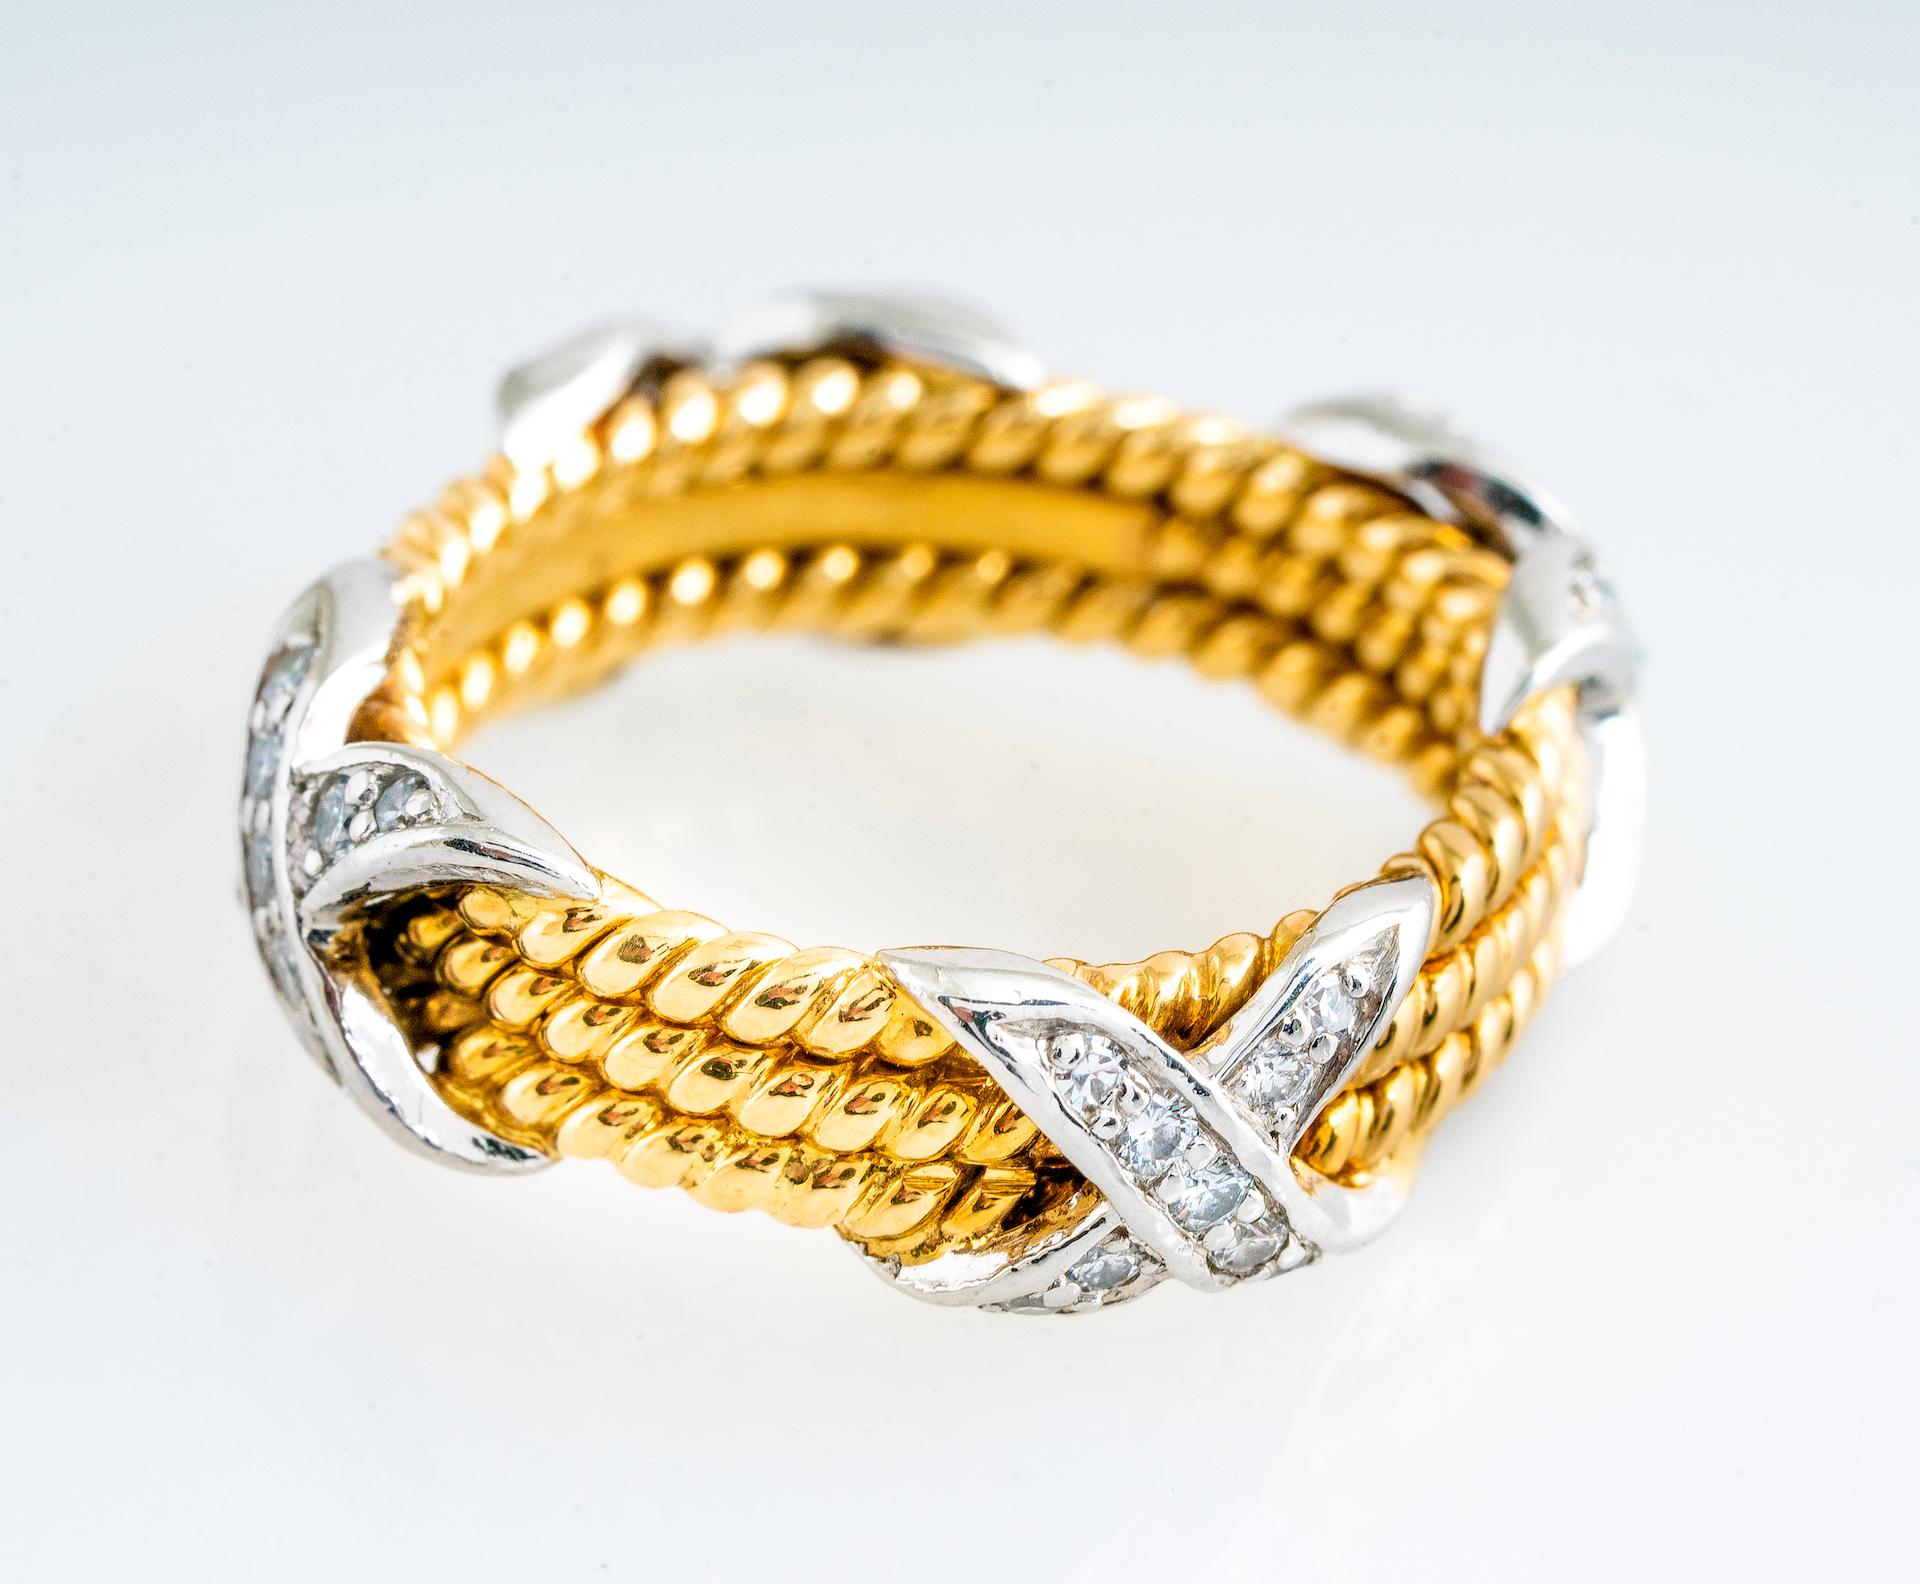 Vintage Tiffany & Co 18K yellow gold and platinum diamond rope x-design ring by Jean Schlumberger.  There are four diamond “X” designs around the ring with 0.28 carat total weight of RBC diamonds G-H color and VS1/VS2 clarity.   Ring is a size 5.